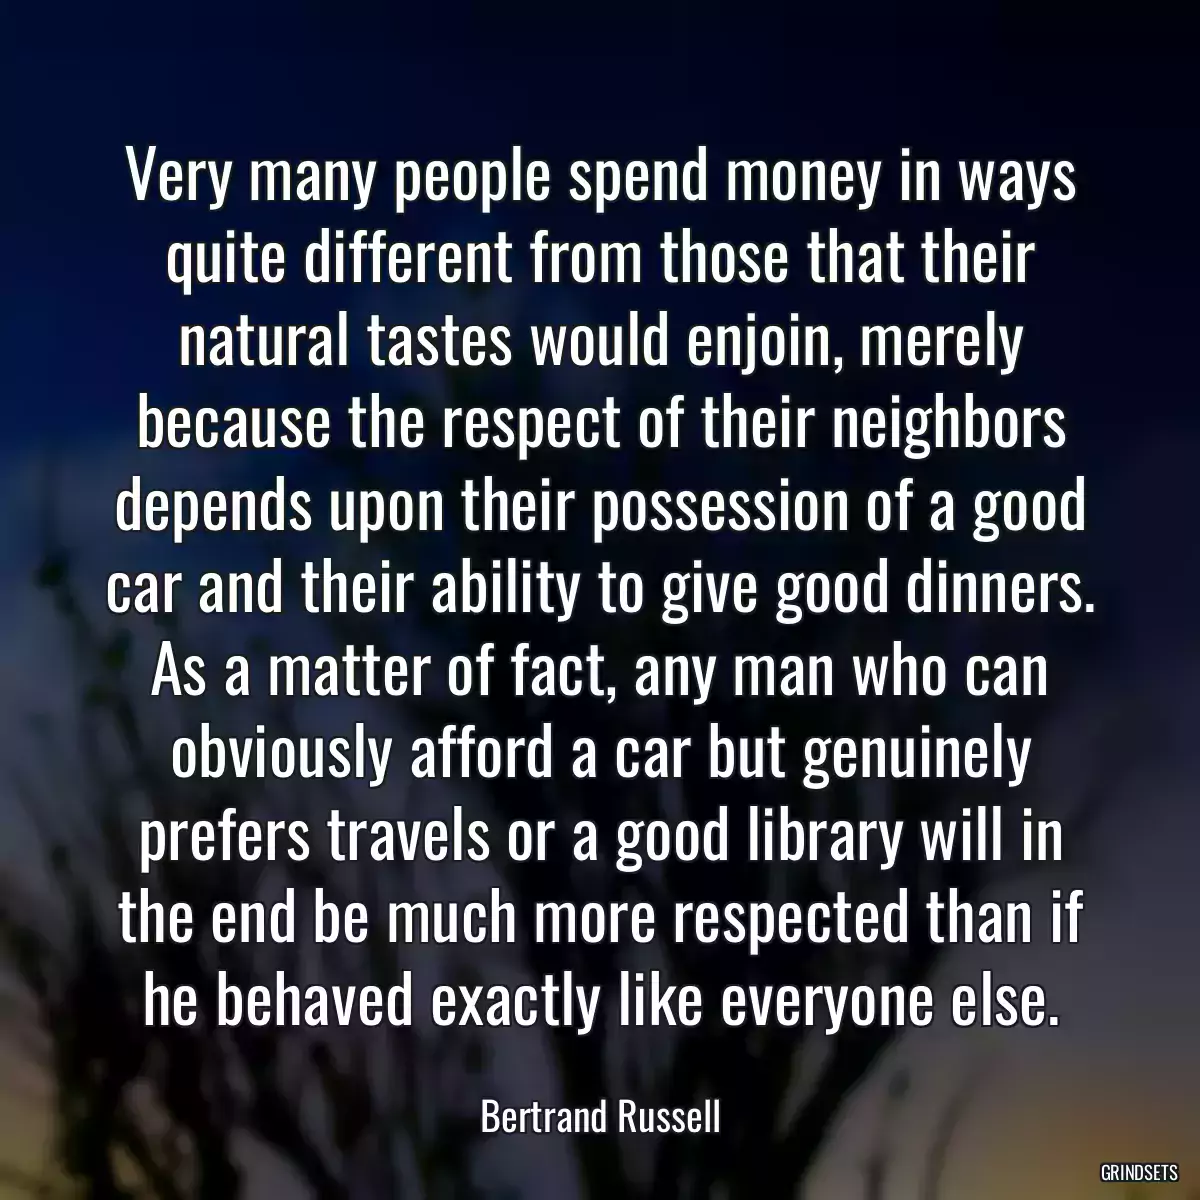 Very many people spend money in ways quite different from those that their natural tastes would enjoin, merely because the respect of their neighbors depends upon their possession of a good car and their ability to give good dinners. As a matter of fact, any man who can obviously afford a car but genuinely prefers travels or a good library will in the end be much more respected than if he behaved exactly like everyone else.